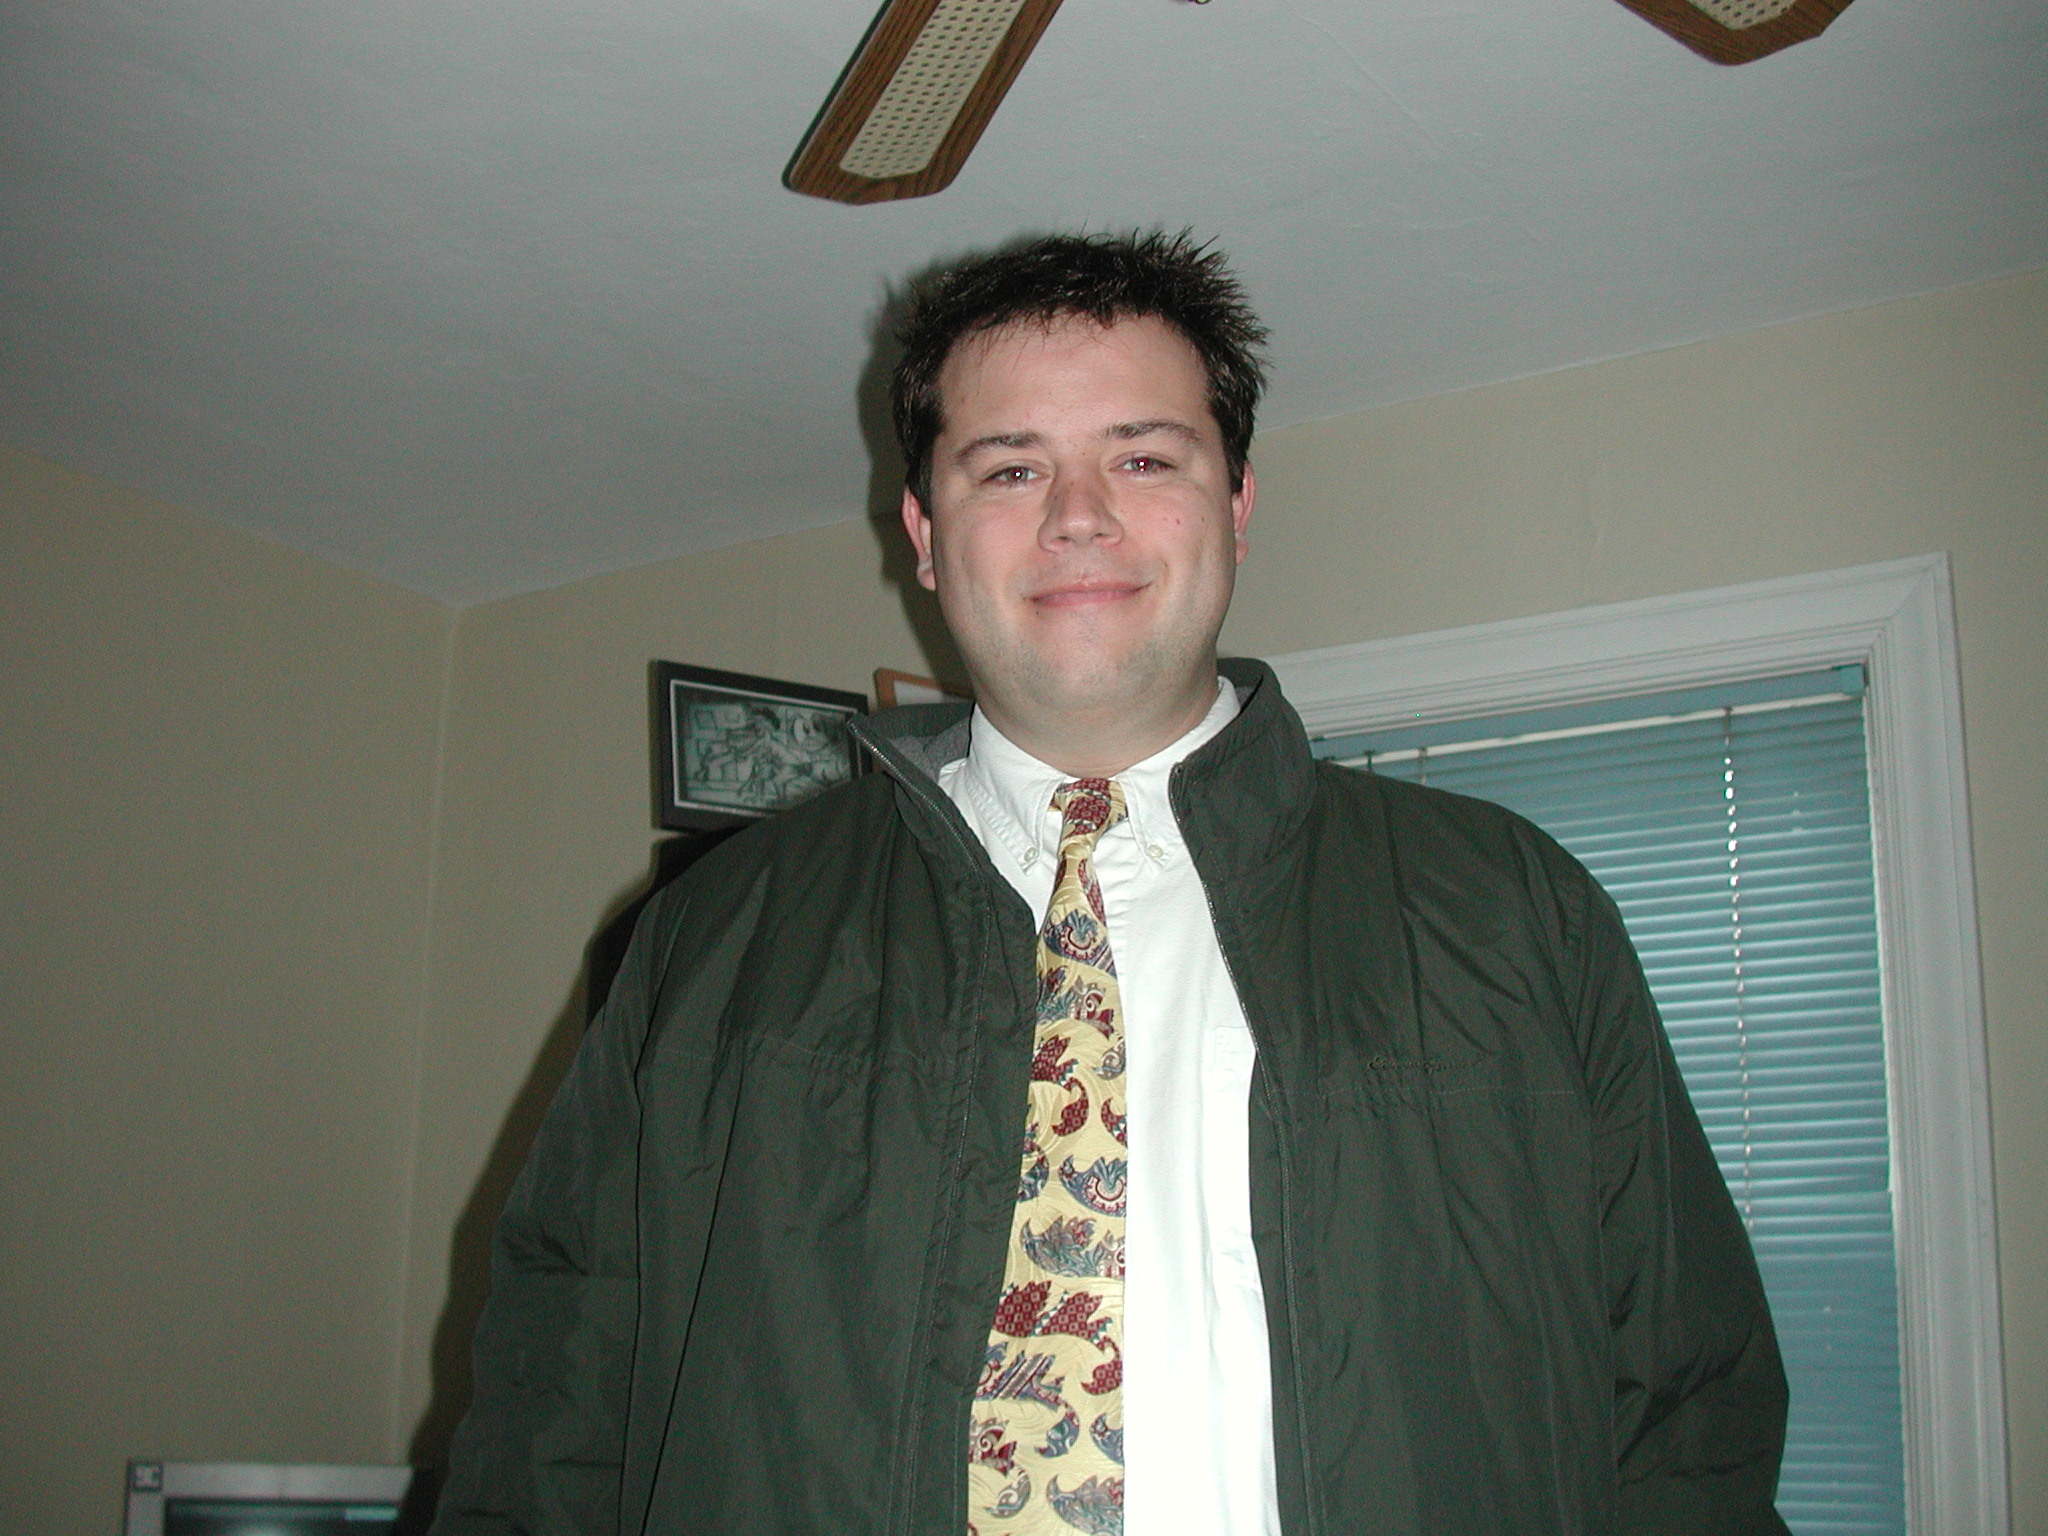 a man is standing with a jacket, tie and glasses